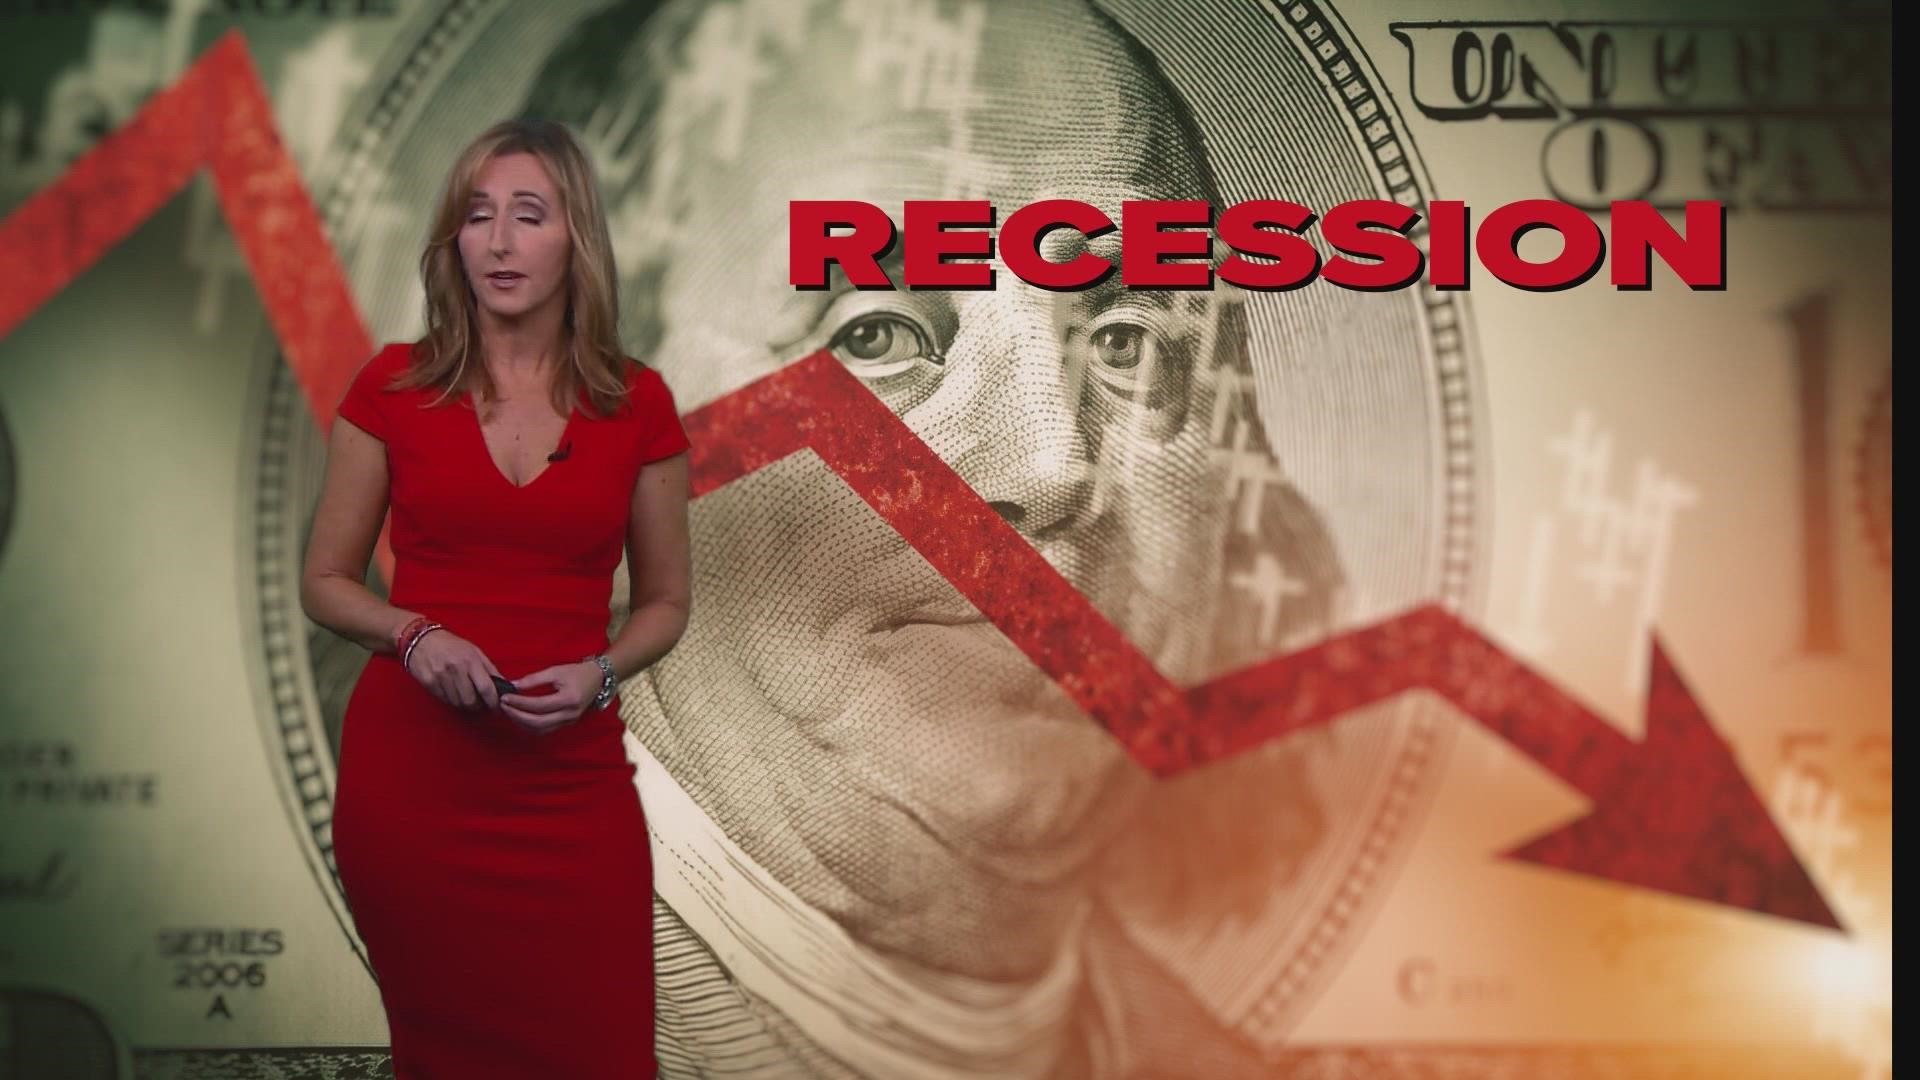 A recent poll by Bankrate found that 52% of economists believe a recession will happen in the next 12 to 18 months.